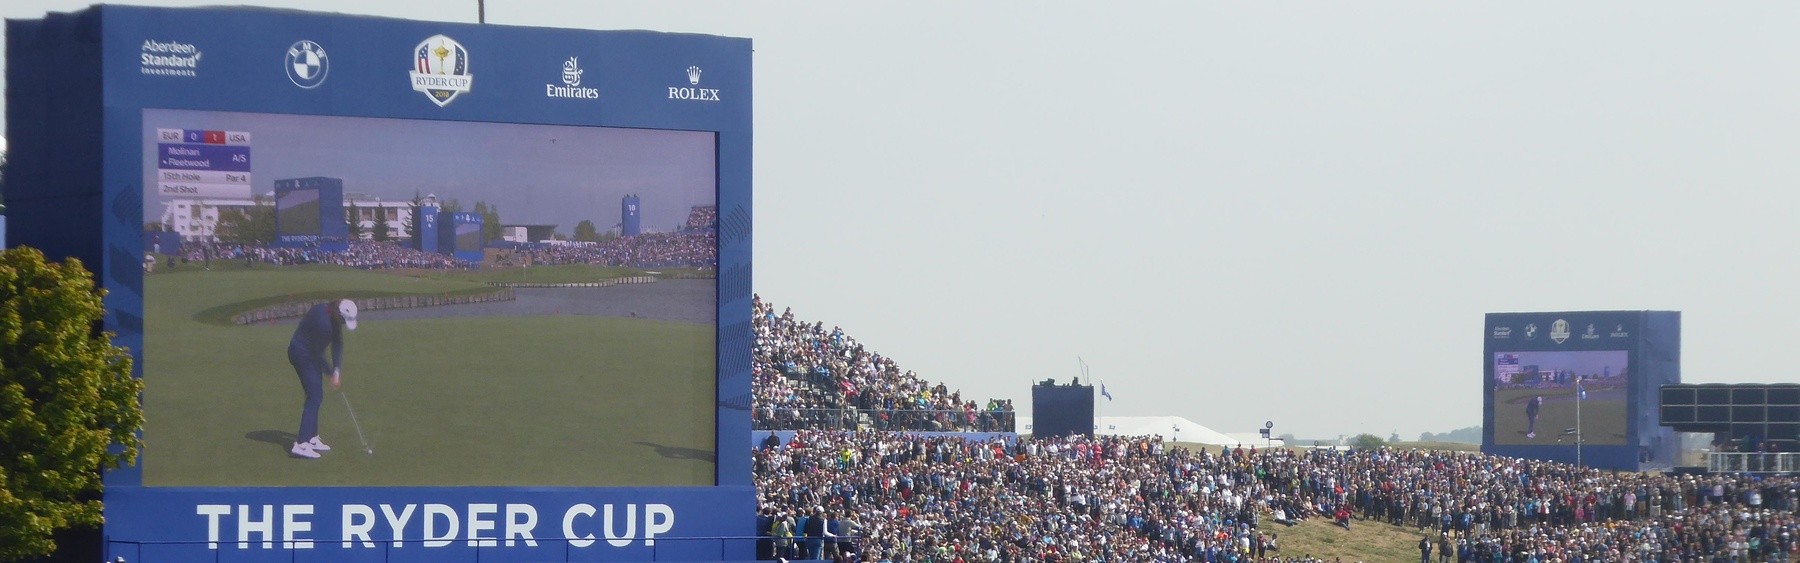 Ryder Cup on course cropscreens